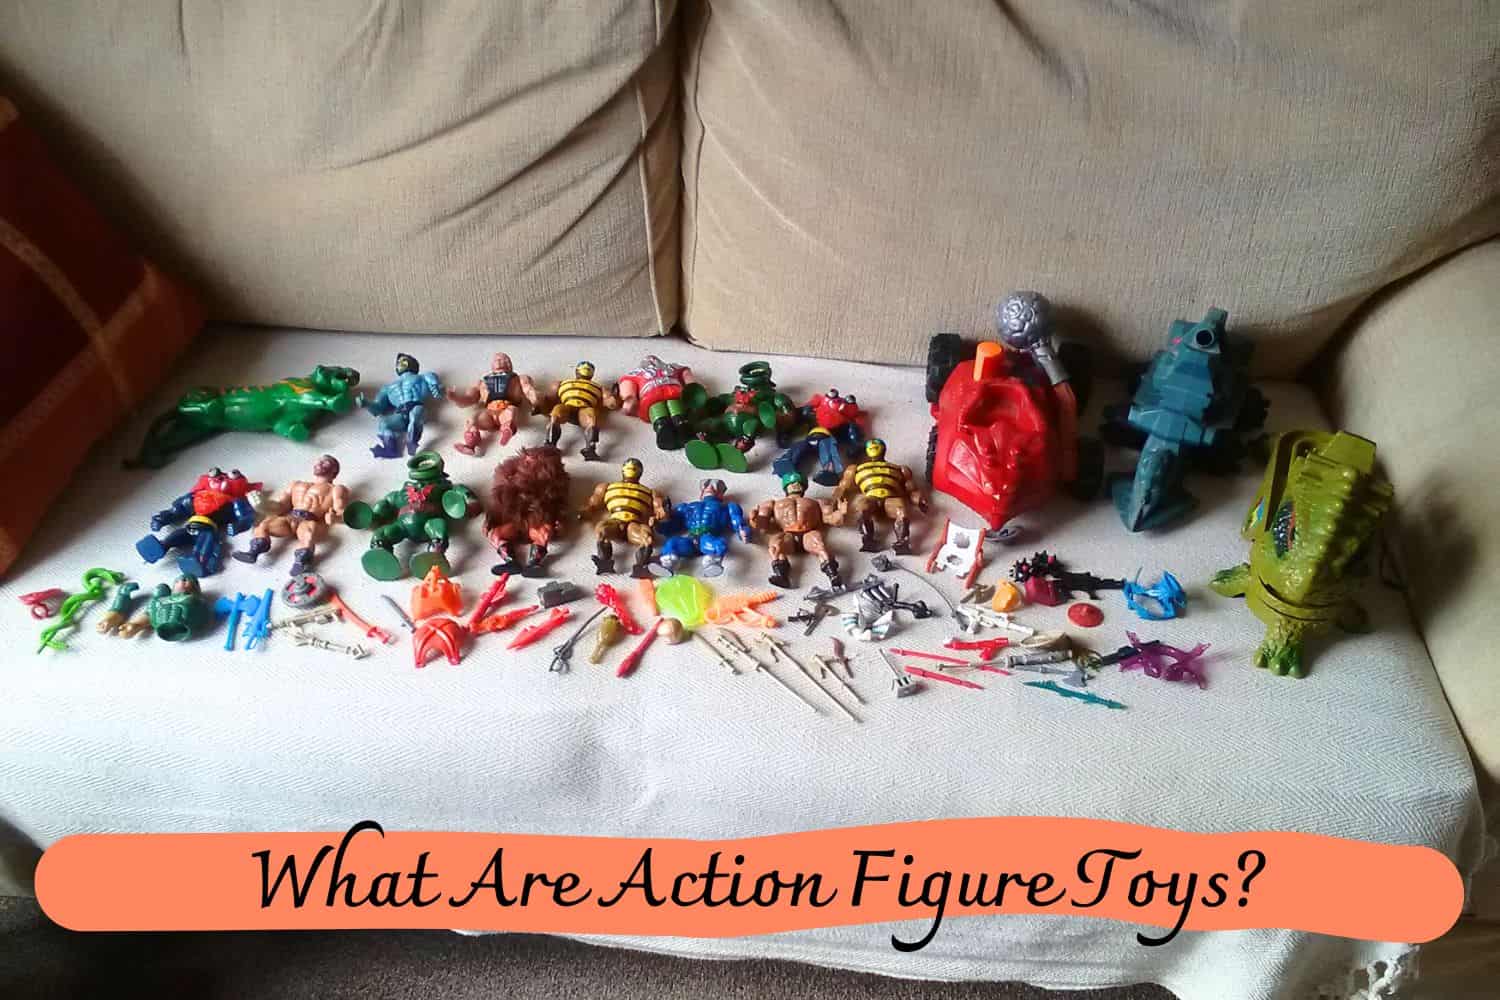 What Are Action Figure Toys?